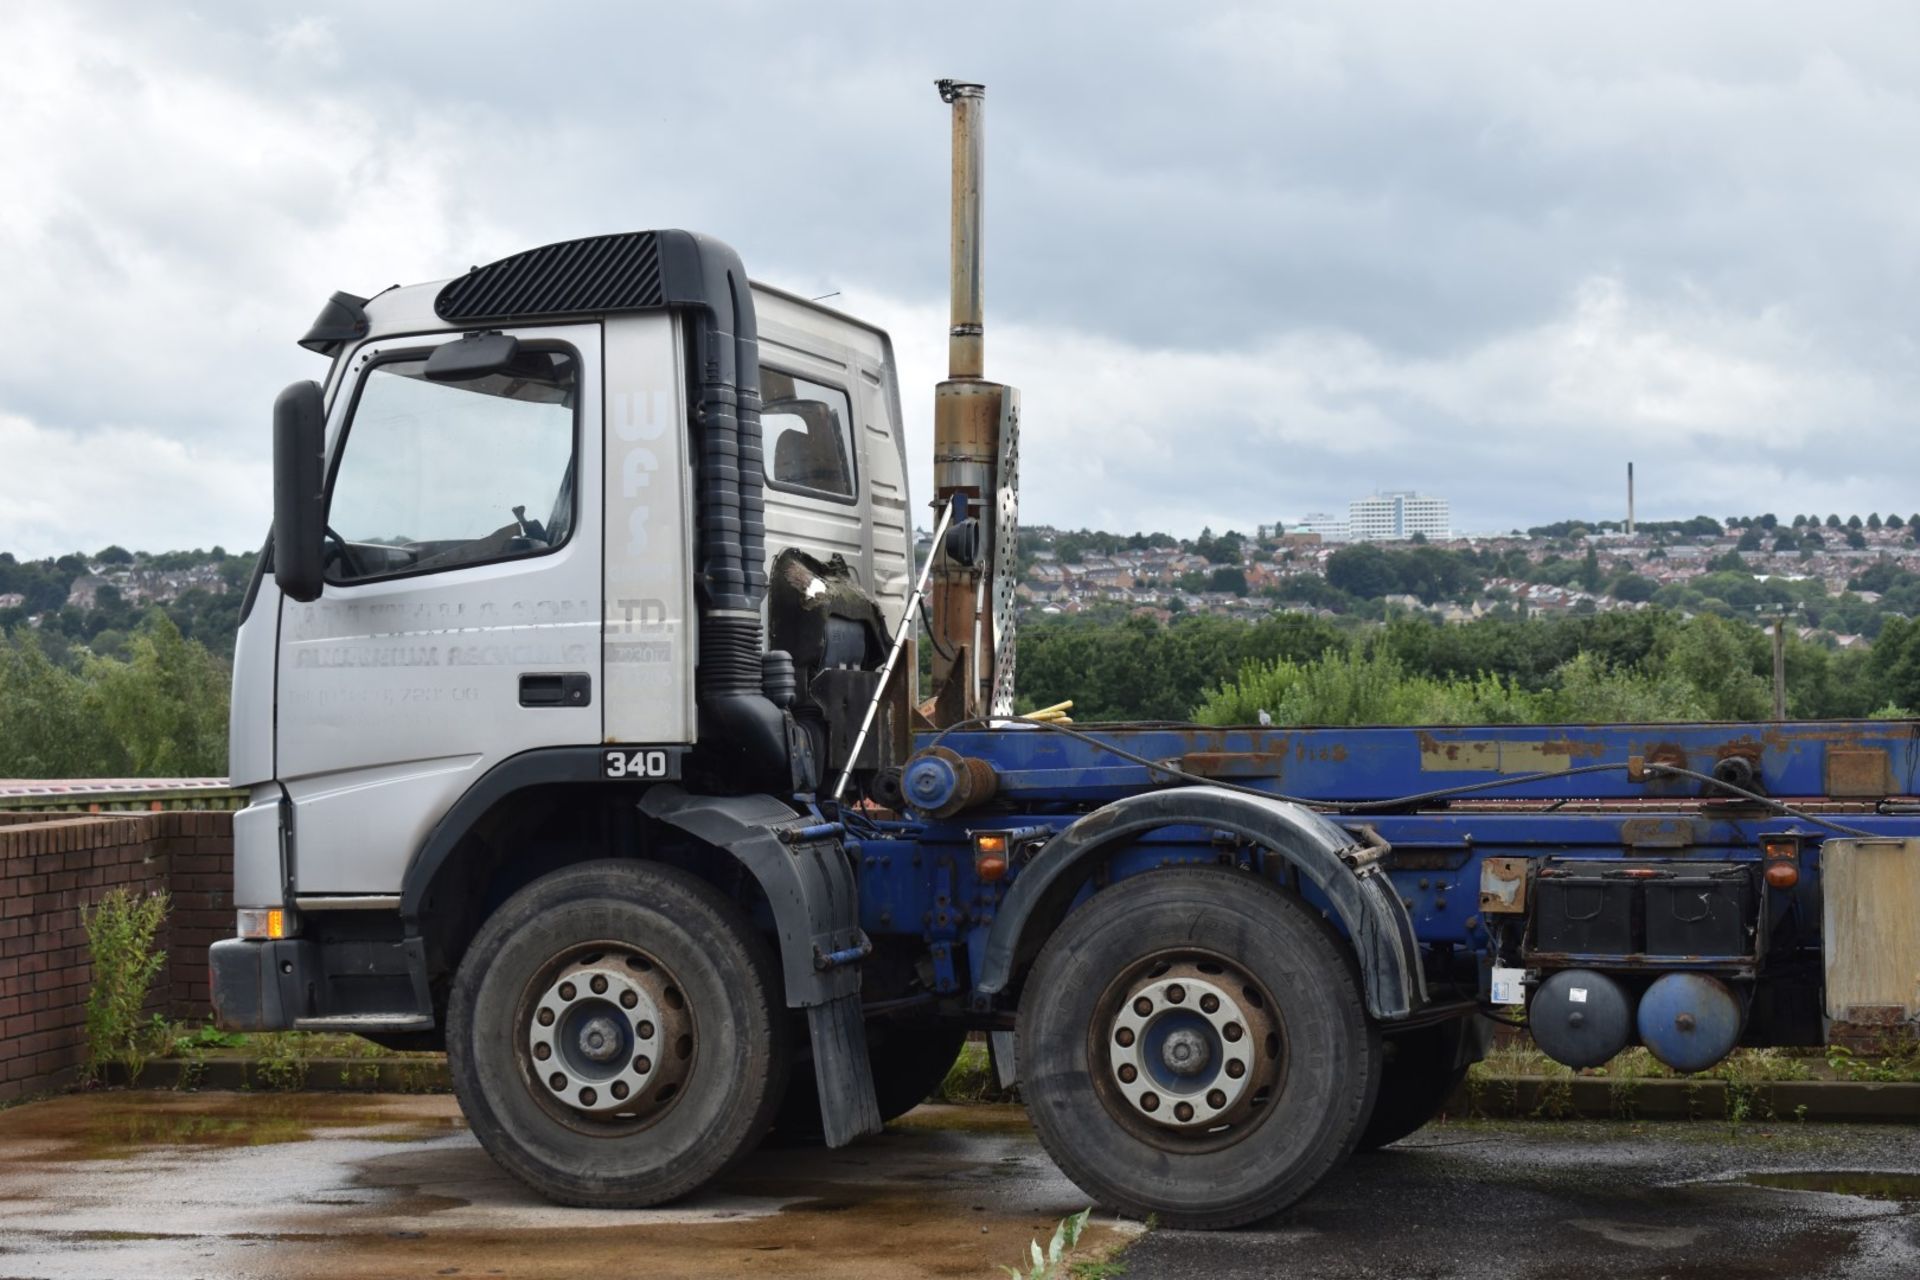 1 x Volvo 340 Plant Lorry With Tipper Chasis and Fitted Winch - CL547 - Location: South Yorkshire. - Image 10 of 25